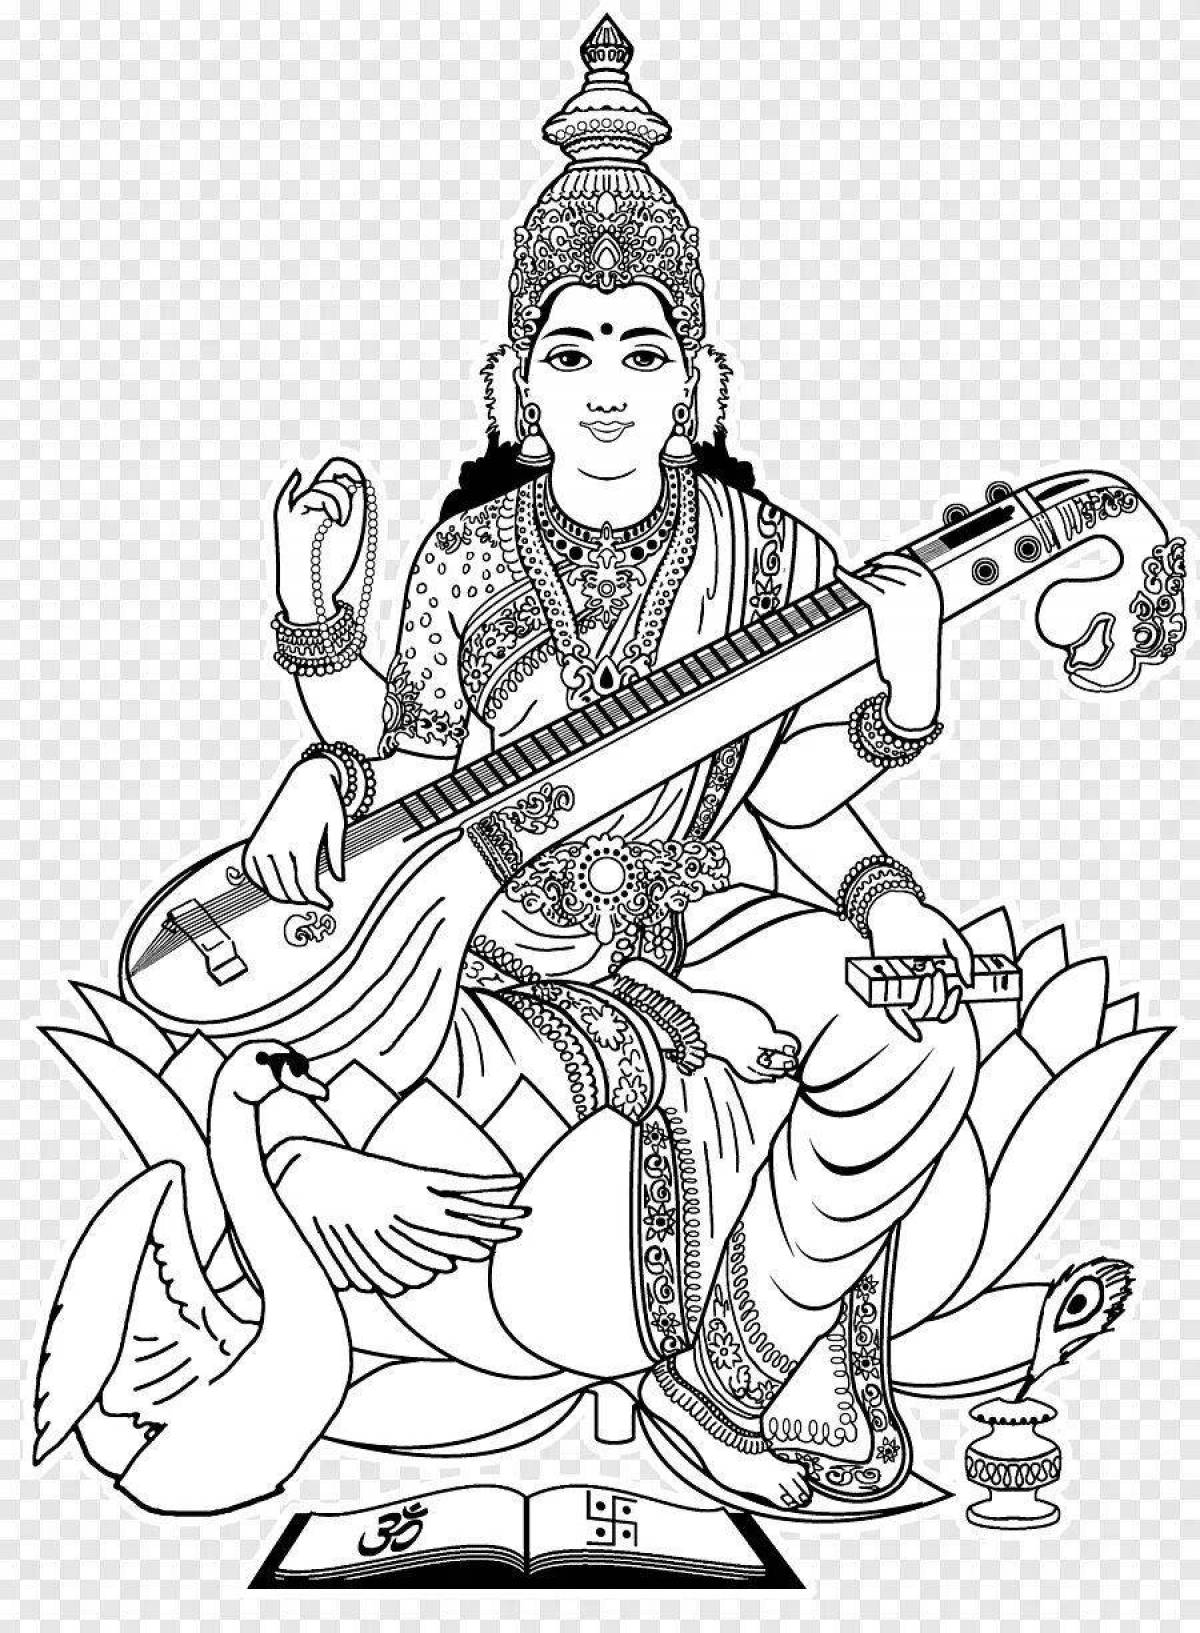 Charming shiva coloring page